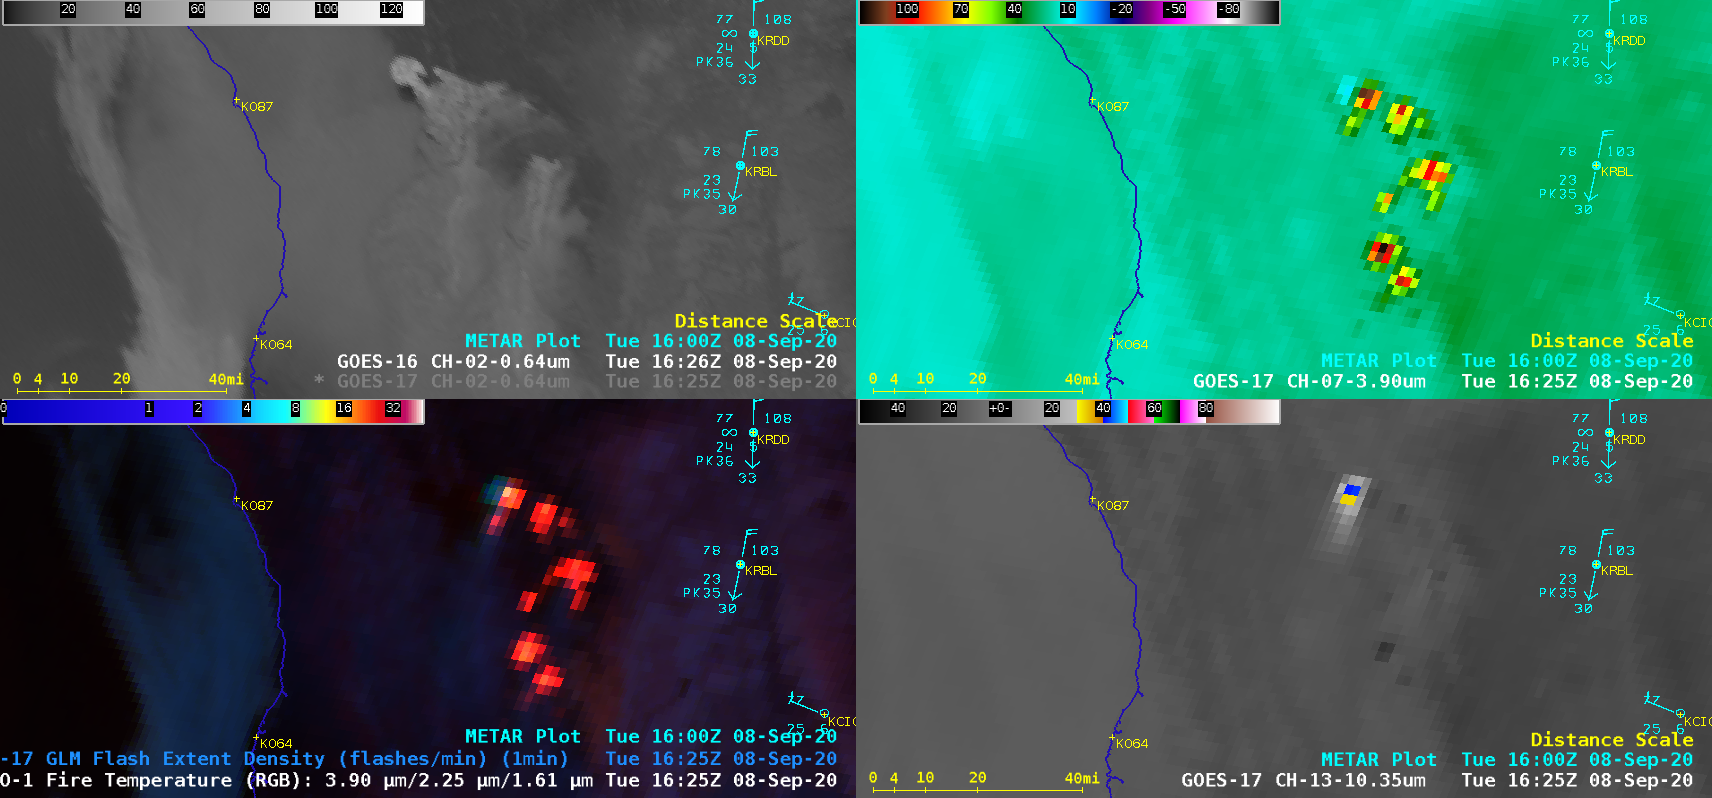 GOES-16 “Red” Visible (0.64 µm, top left), Shortwave Infrared (3.9 µm, top right), Fire Temperature RGB + GLM Flash Extent Density (bottom left) and “Clean” Infrared Window (10.35 µm, bottom right) [click to play animation | MP4]